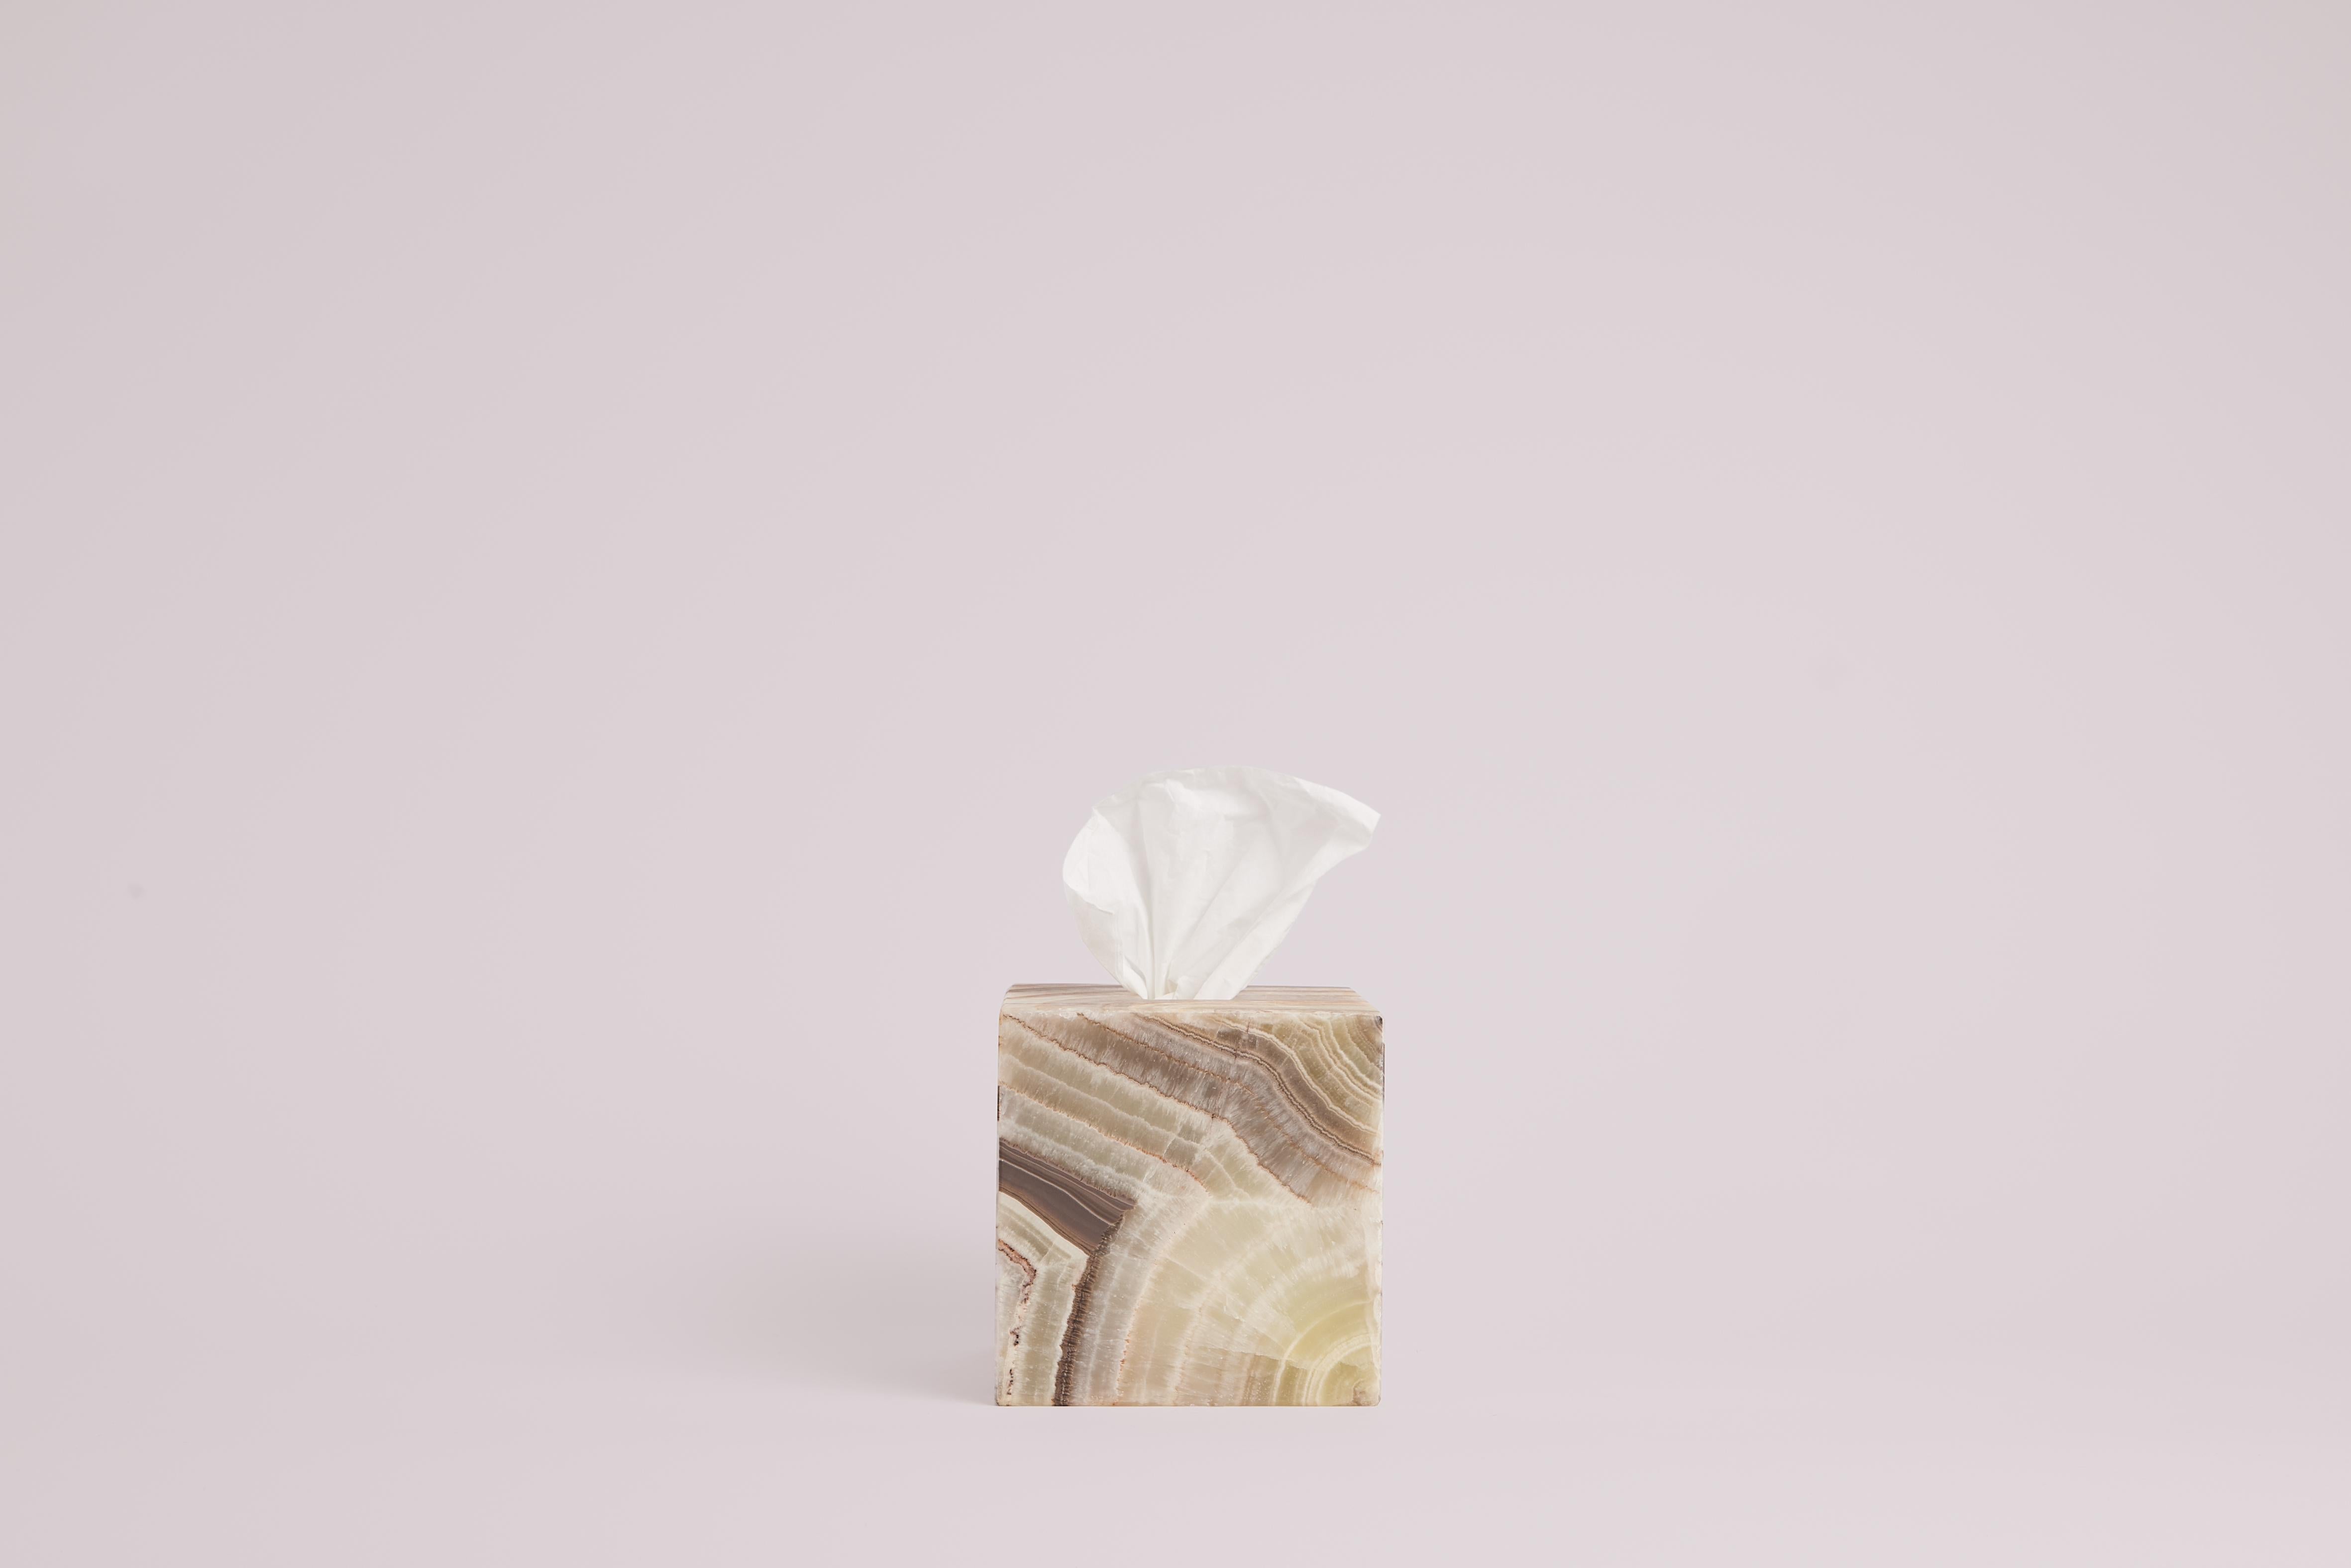 The Anne Tissue Box in Red Onyx, designed by Studio Gaïa, is a stylish and functional accessory designed to add a touch of sophistication to any space. Made from high-quality red onyx, this tissue box combines the natural beauty of the stone with a